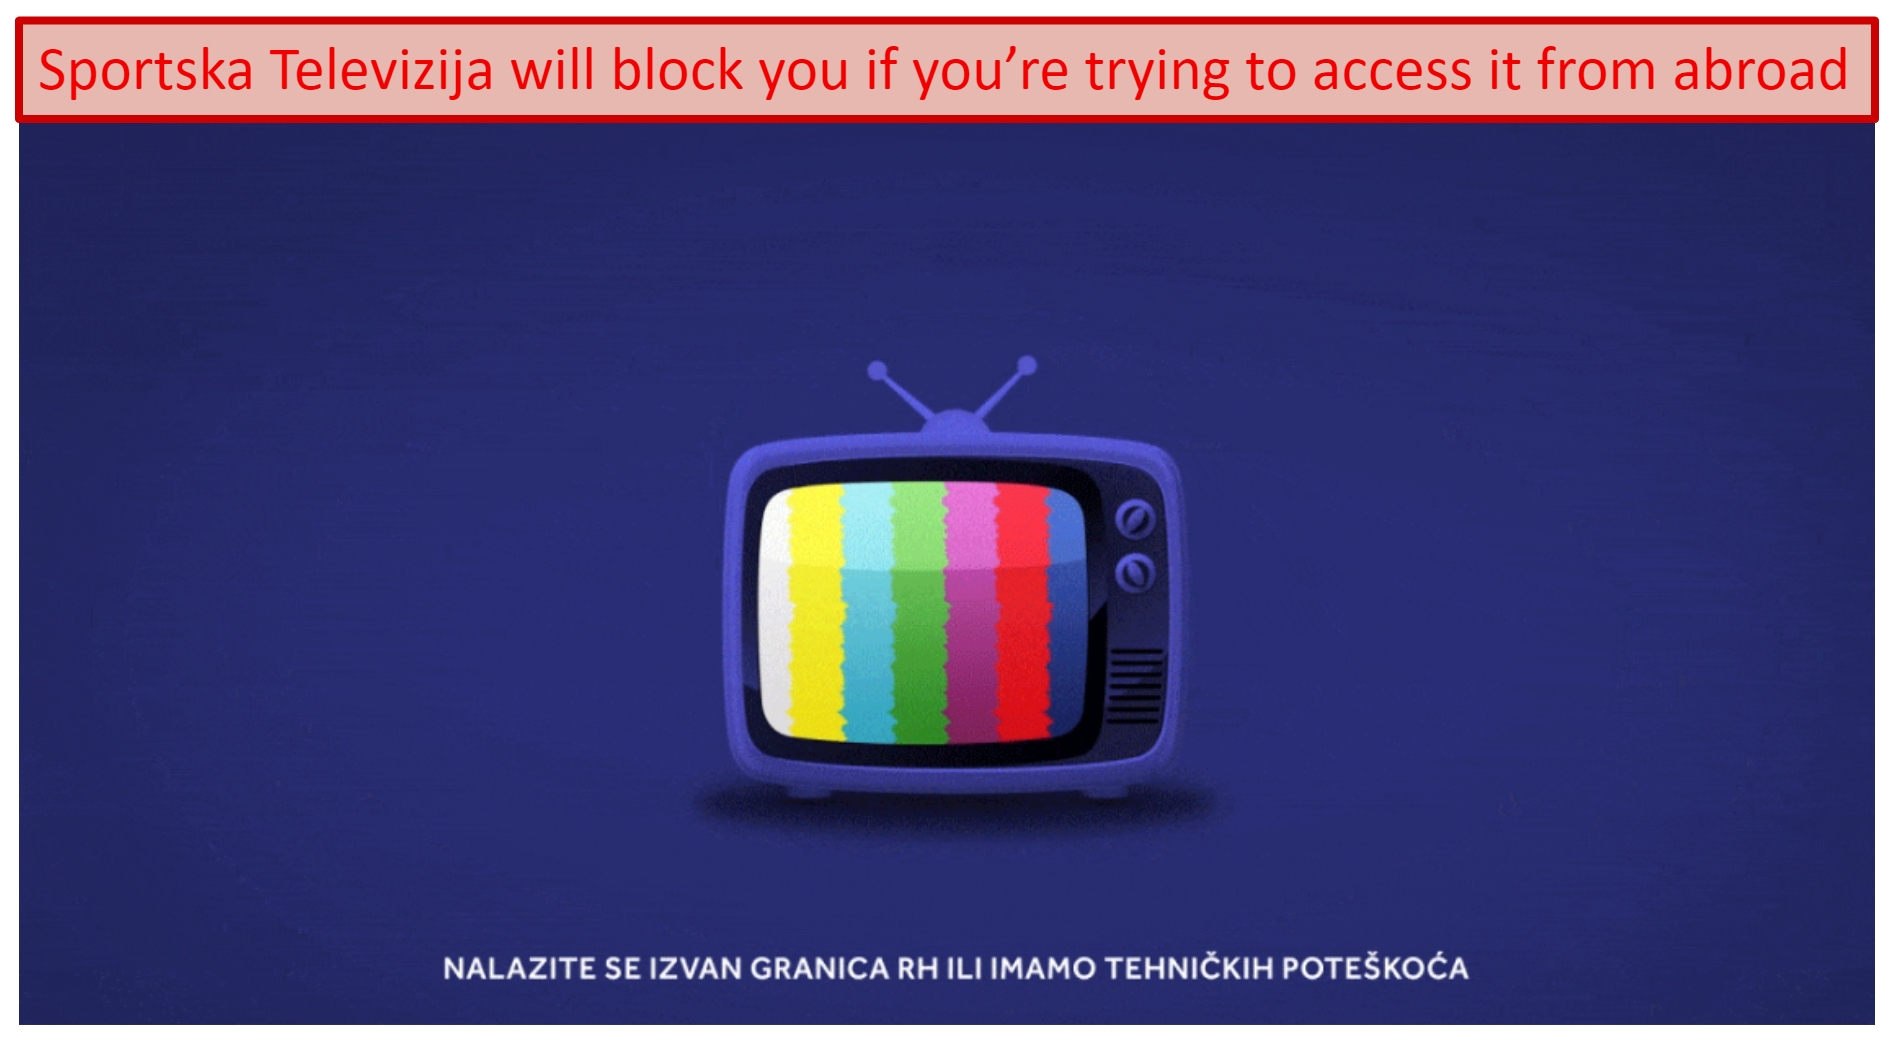 A screenshot of Sportska Televizija showing an error message when connecting to it from outside the Croatia